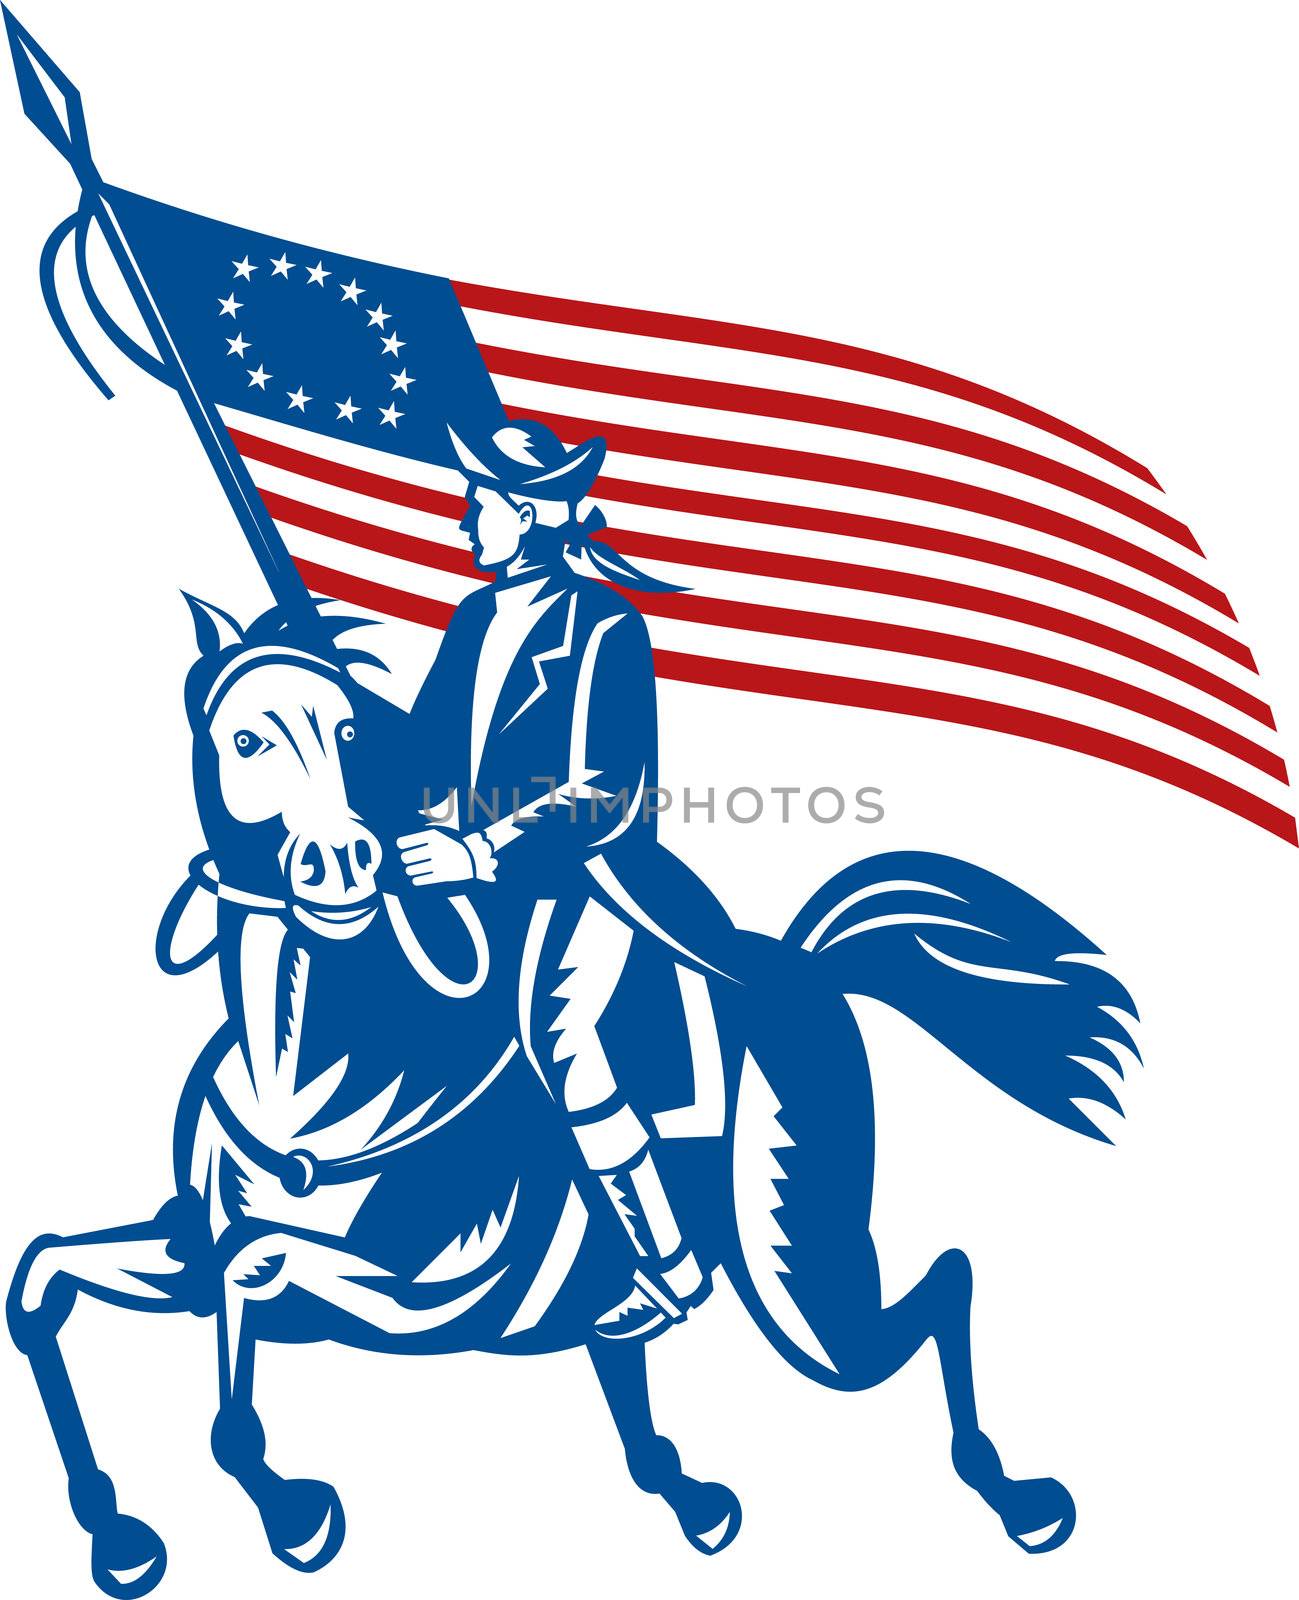 American revolutionary general riding horse Betsy Ross Flag by patrimonio